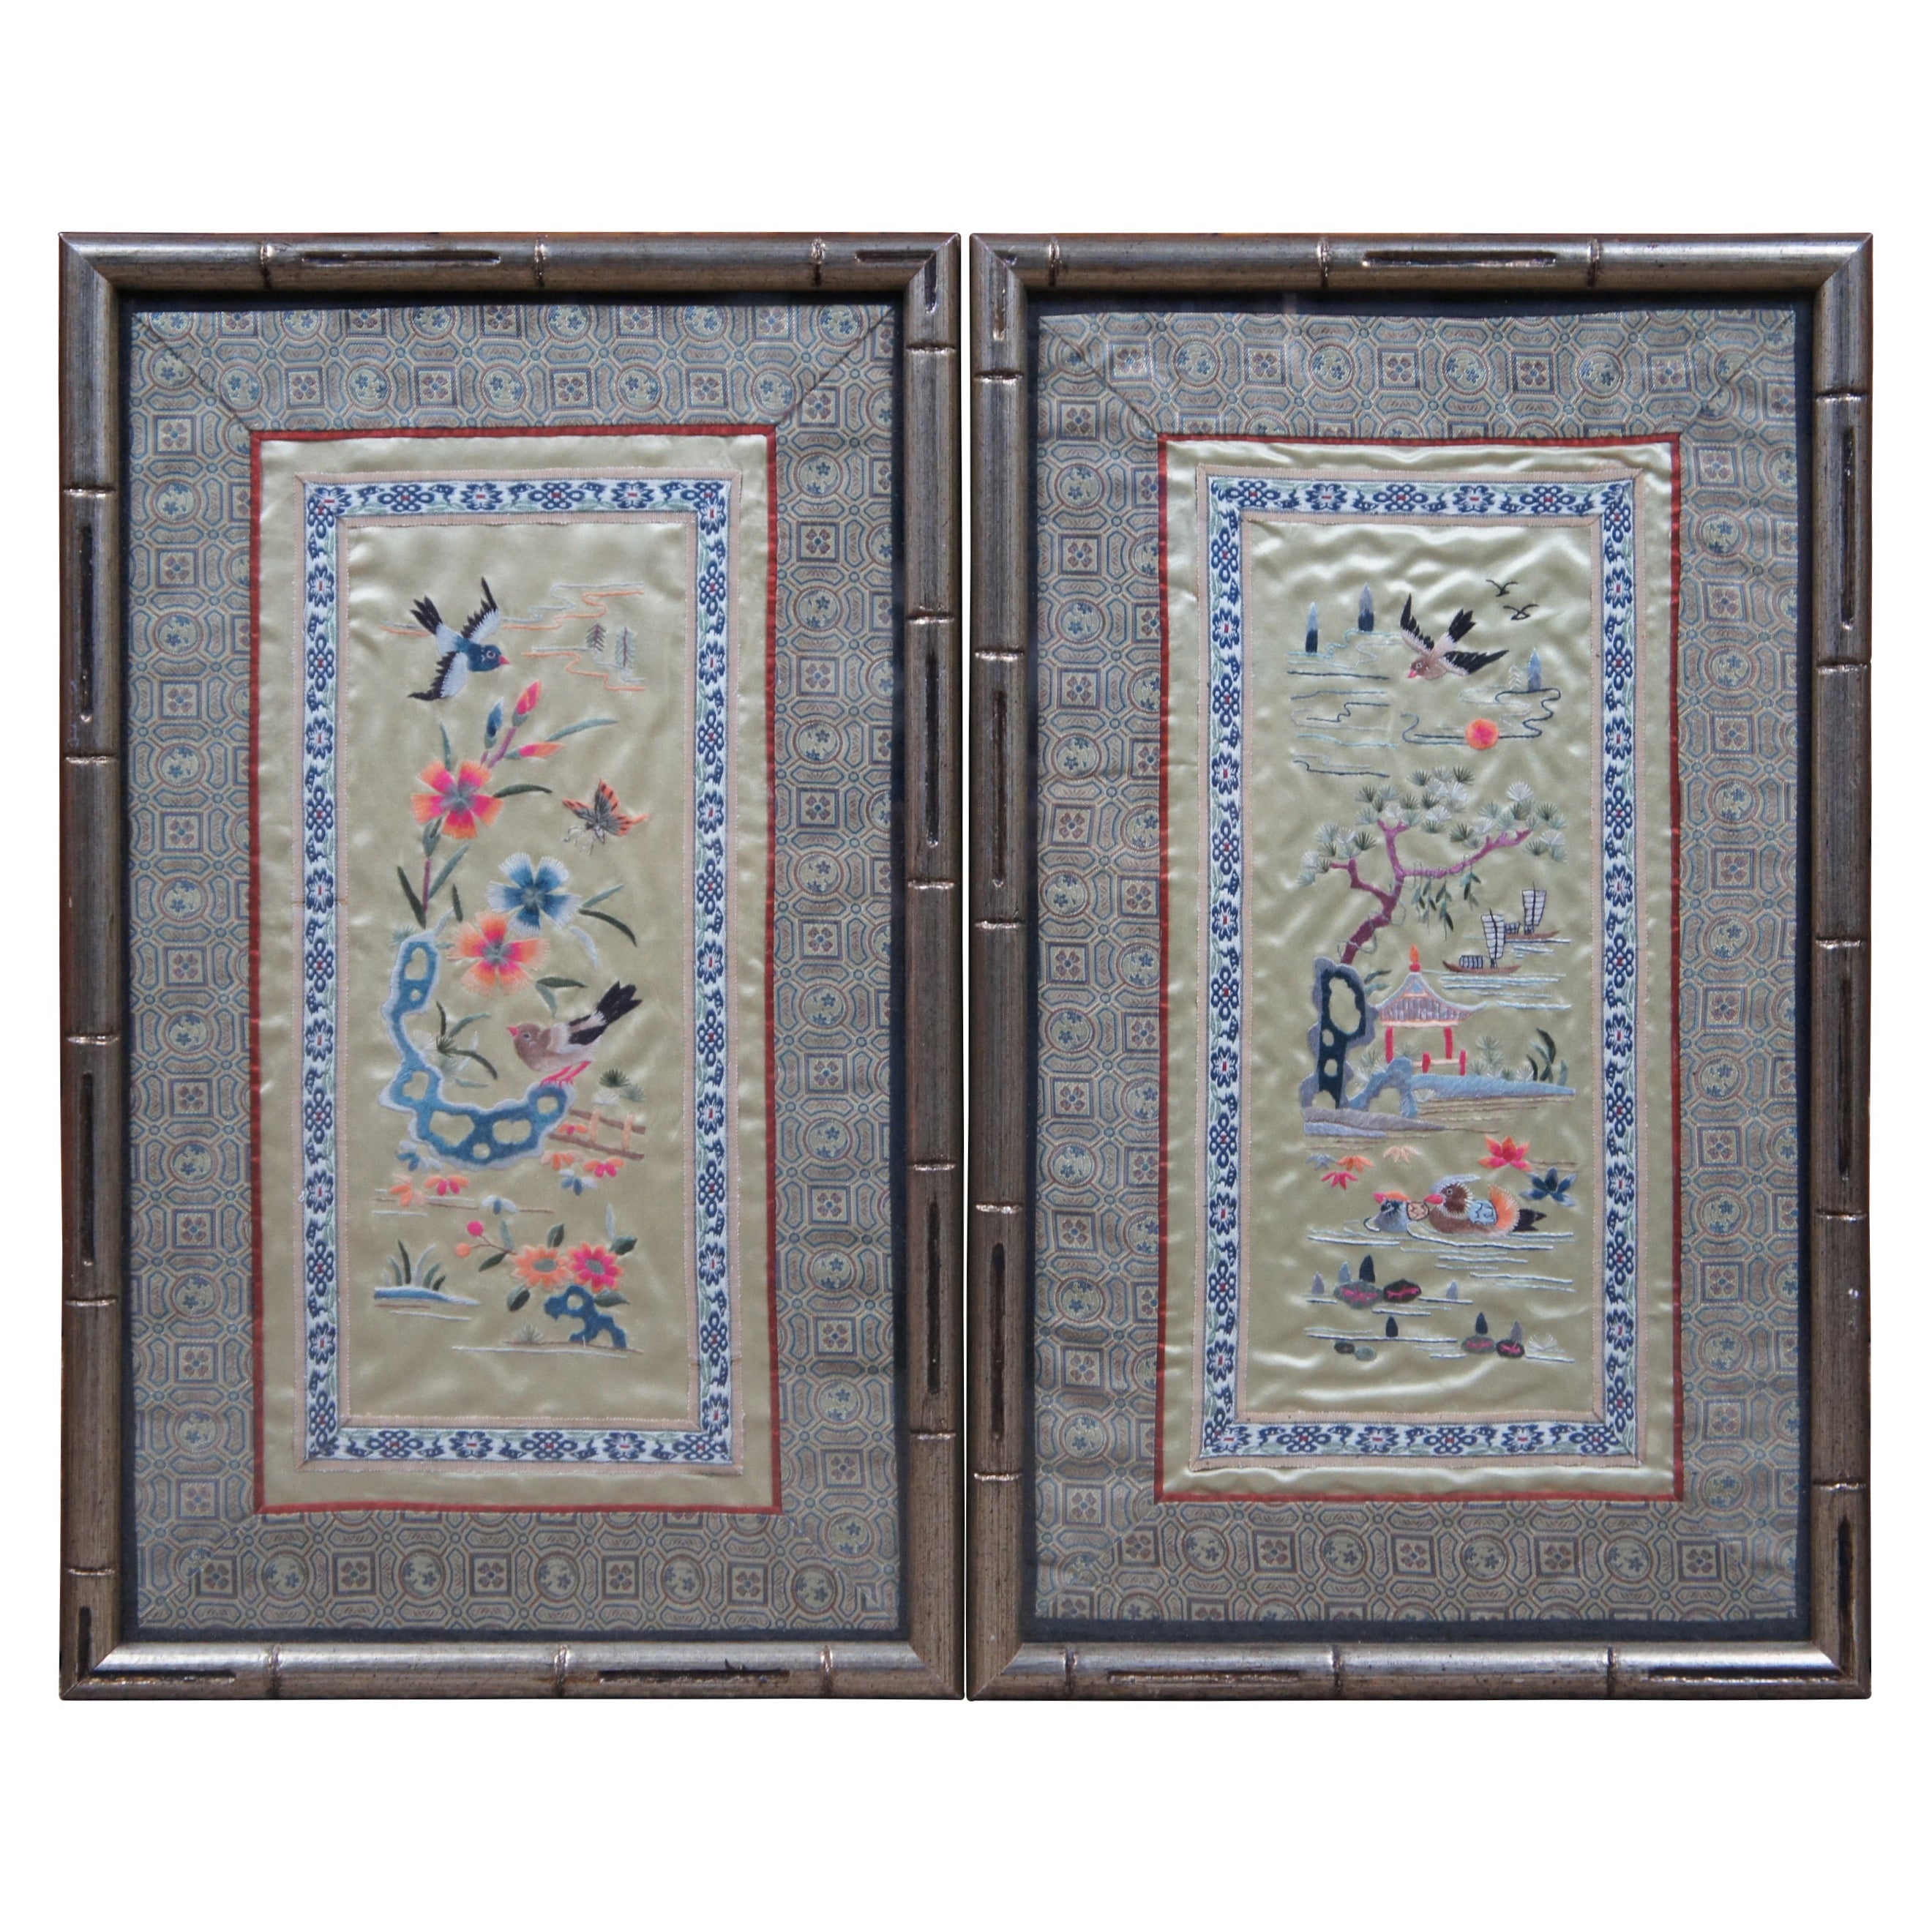 2 Gold Silk Embroidered Chinese Tapestry Landscapes Birds Flowers Framed Pair For Sale